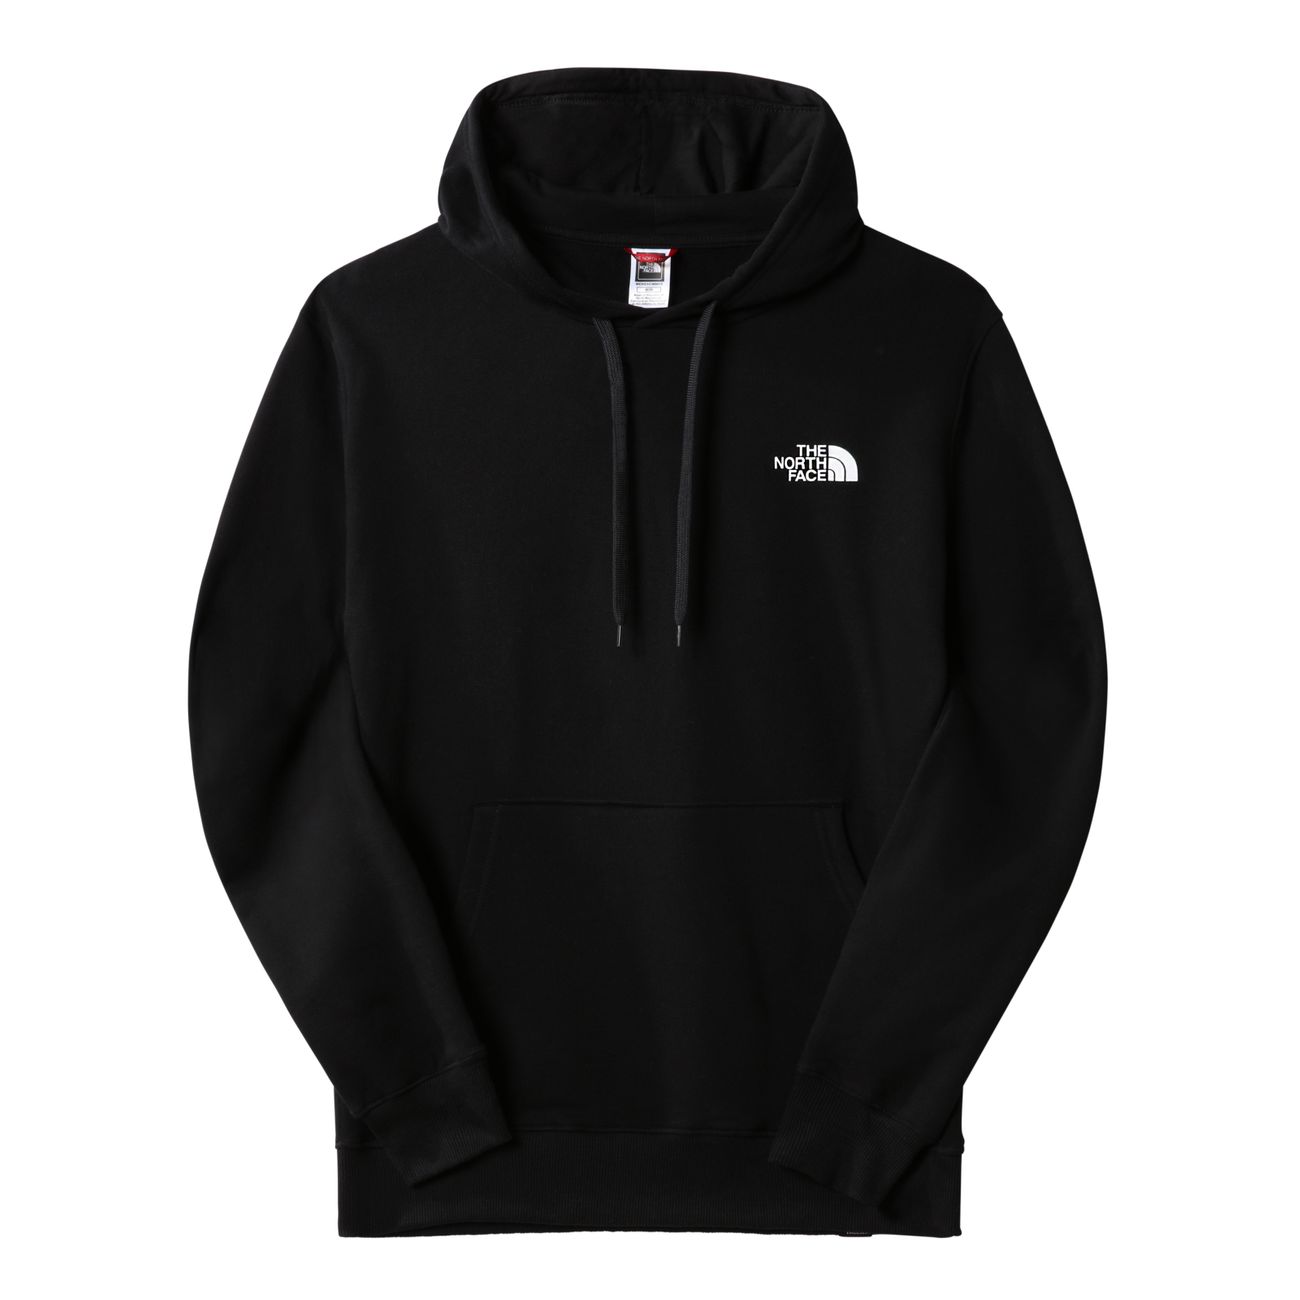 THE NORTH FACE M SIMPLE DOME HOODIE Herren Kapuzenpullover - The North Face - SAGATOO - 196248033754